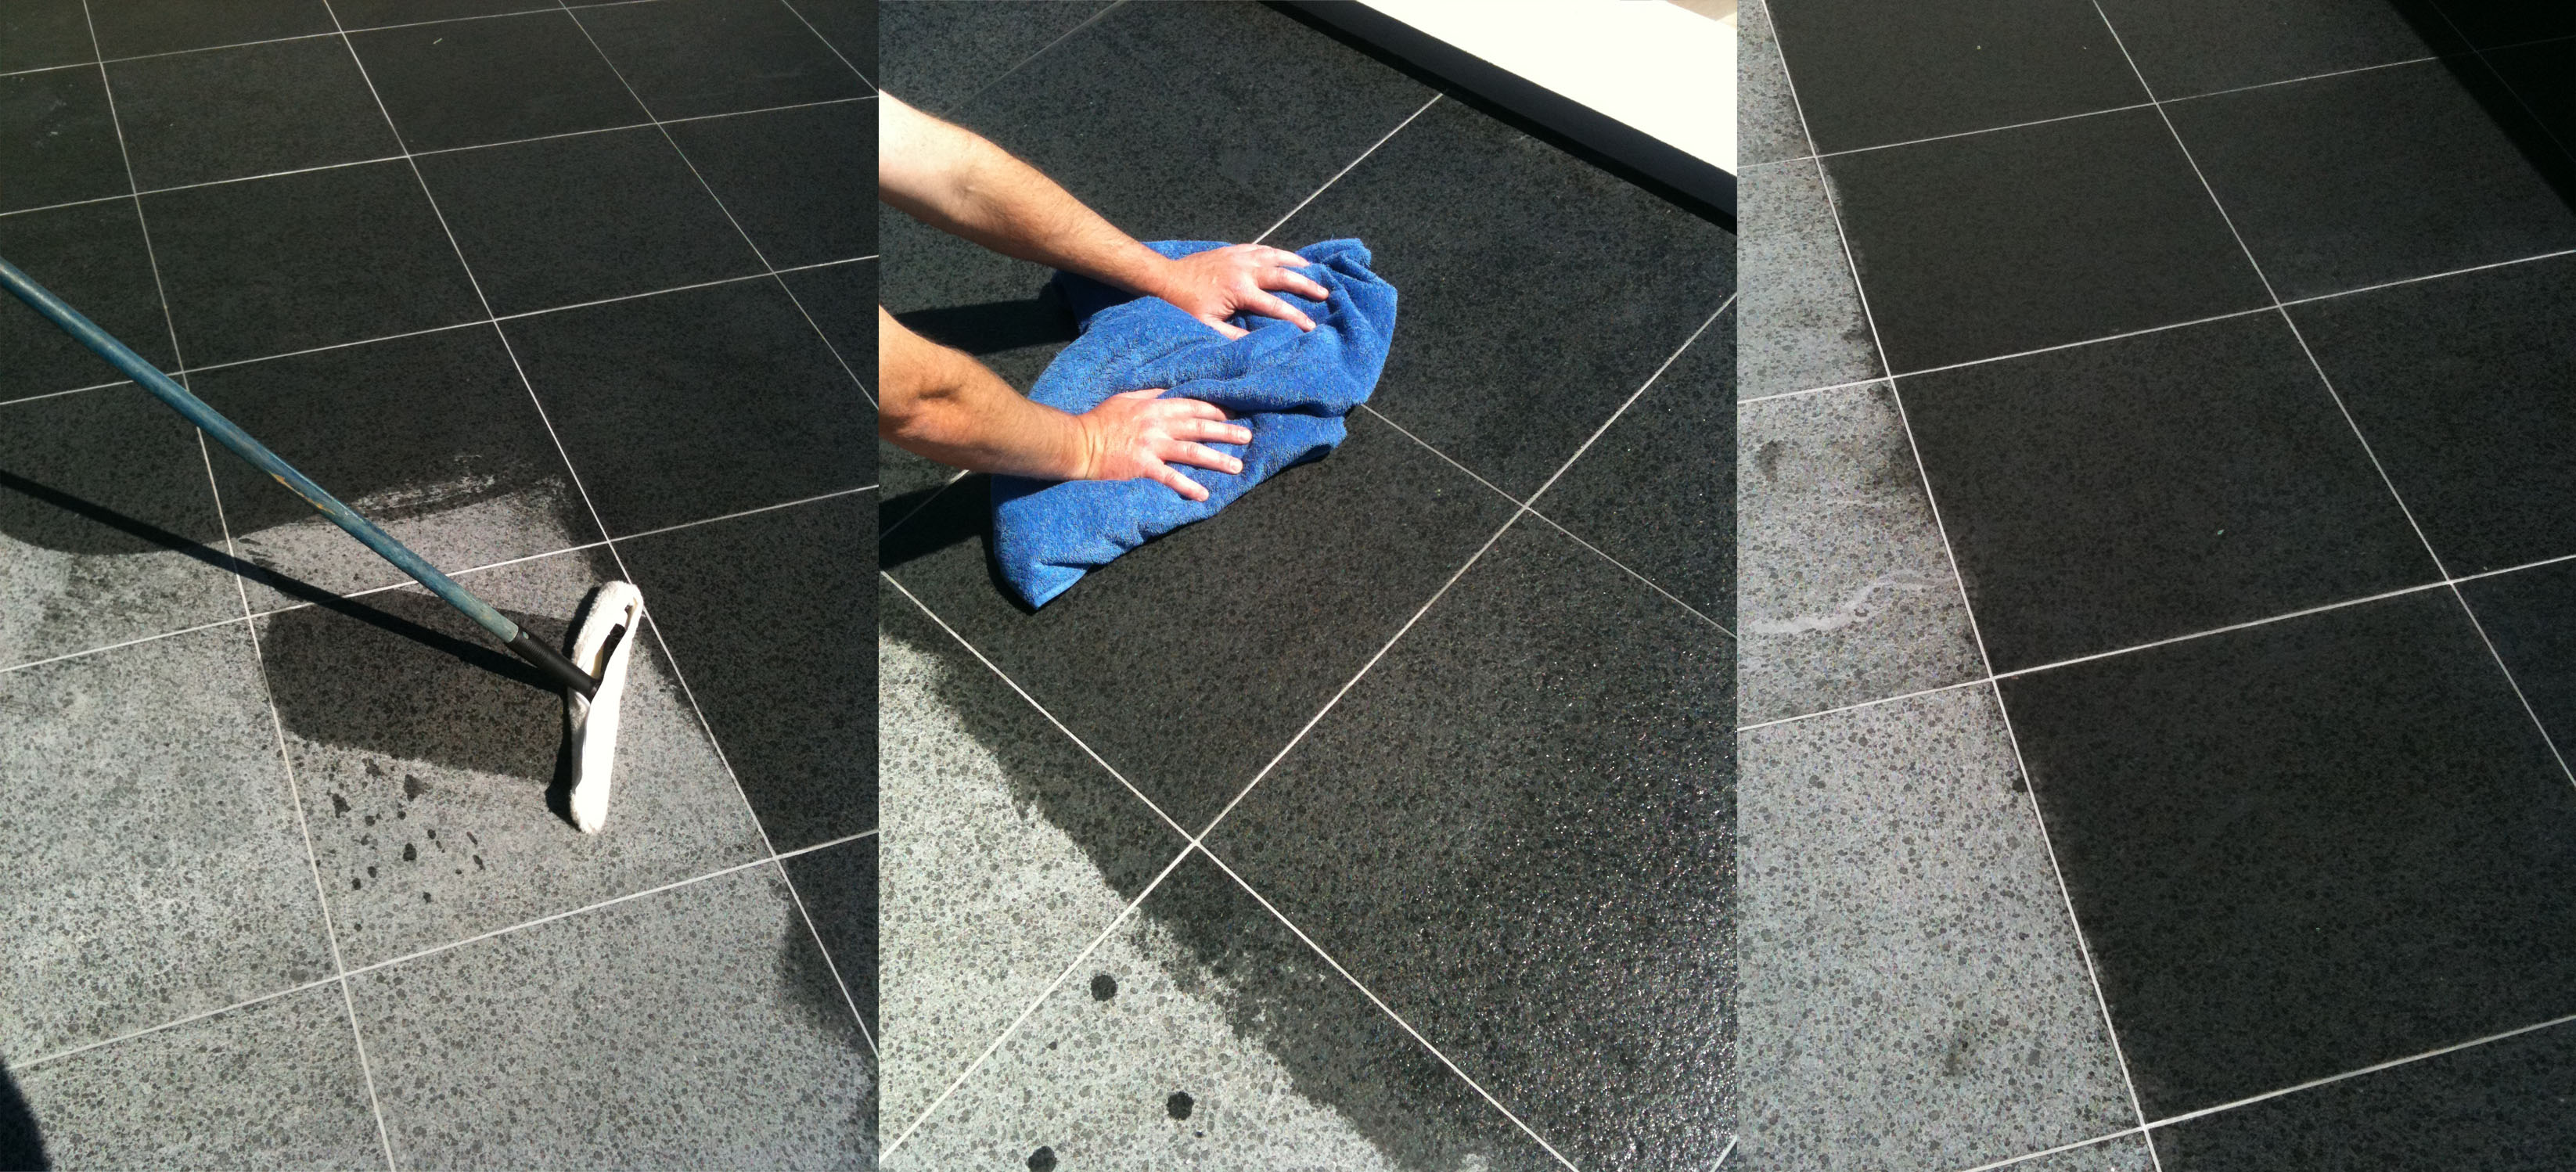 How To Seal Stone Tile Grout Using A, How To Remove Grout Sealer From Tile